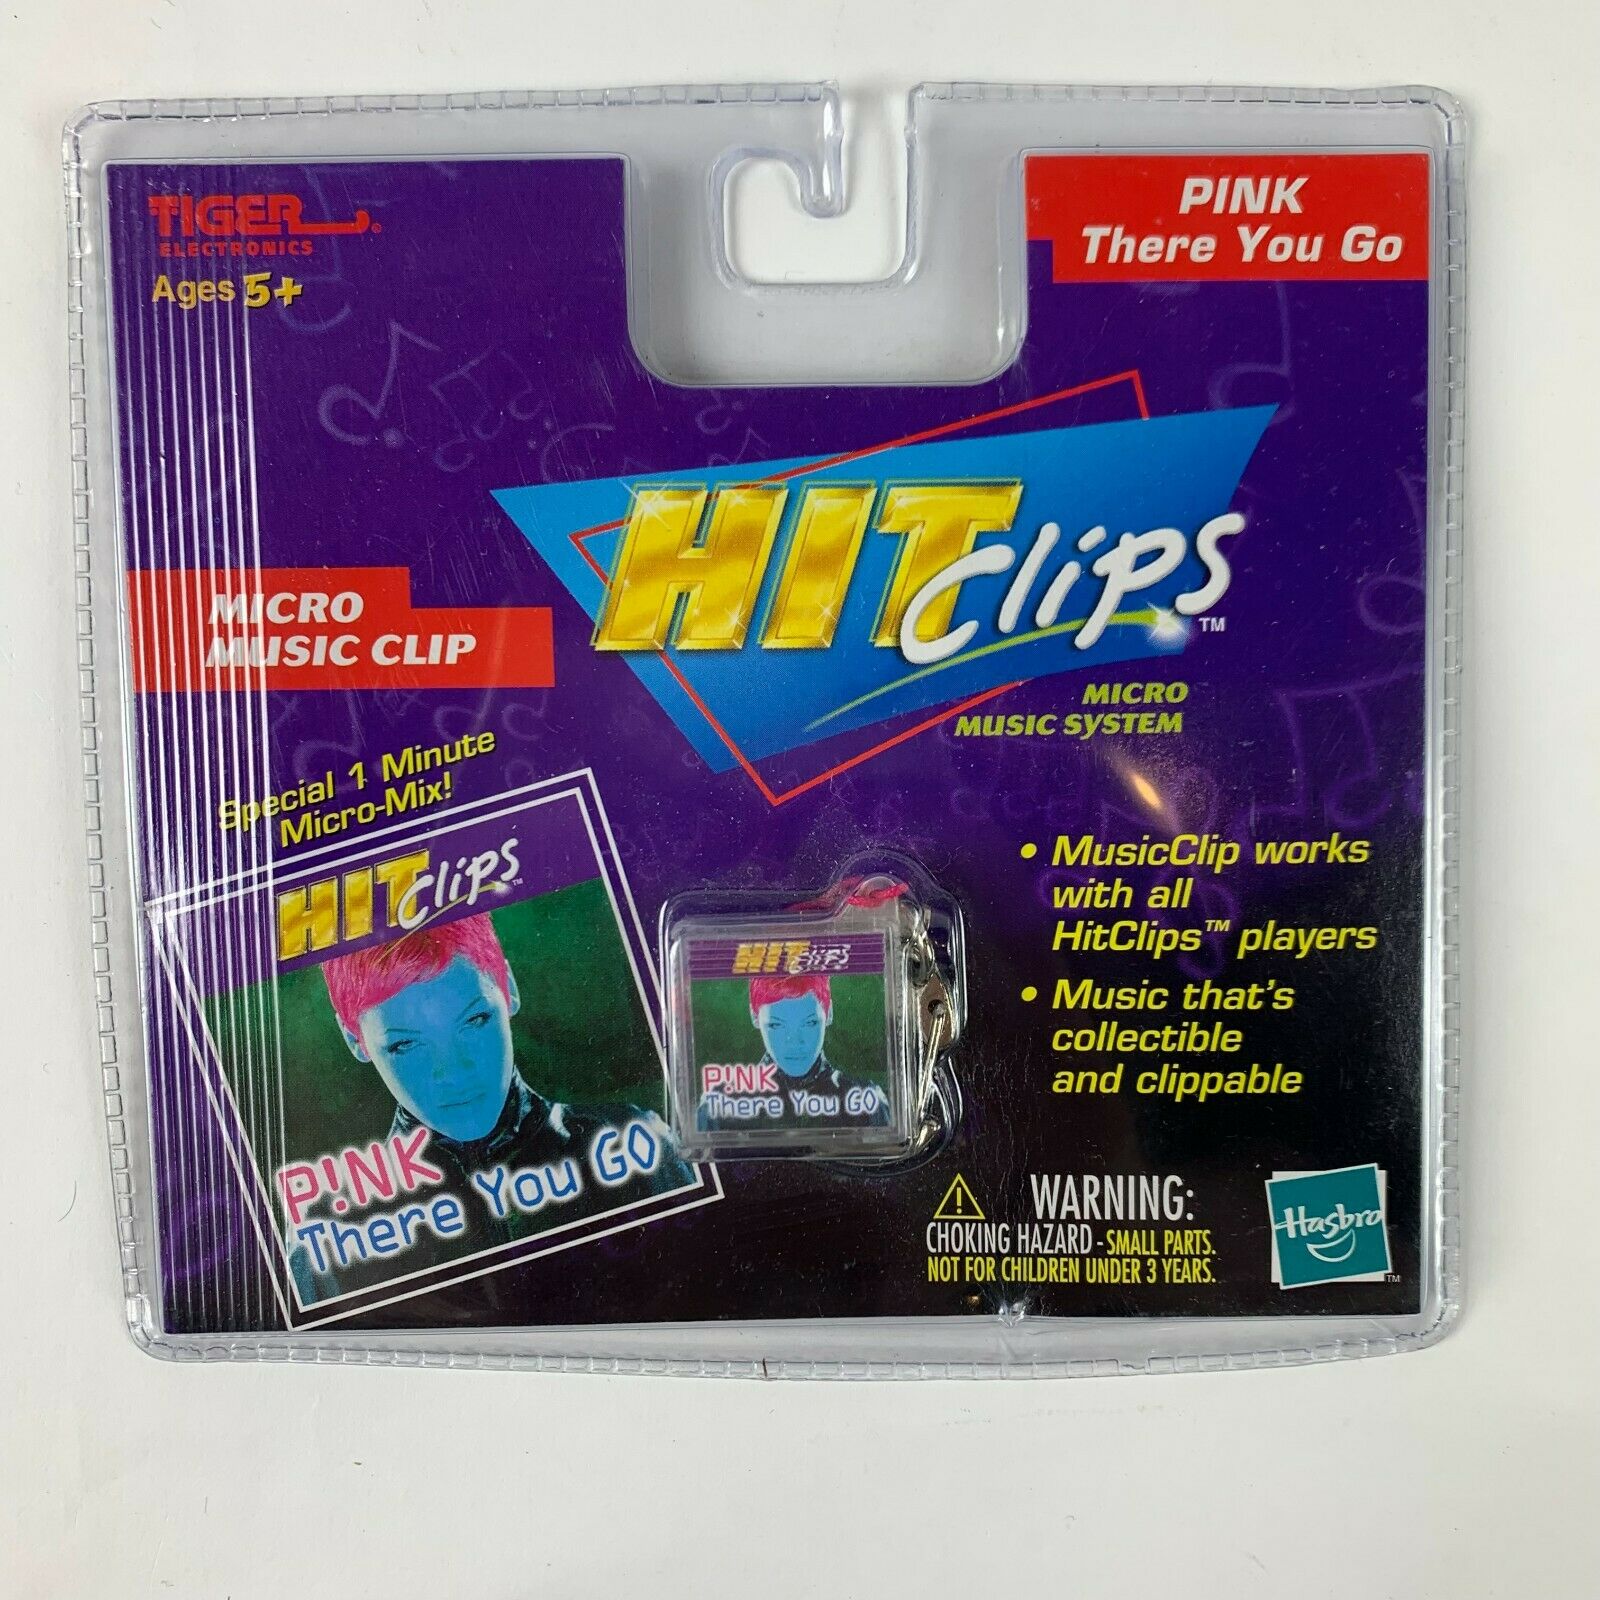 Tiger Electronics Hit Clips Pink There You Go Micro Music Clip New Sealed Rare